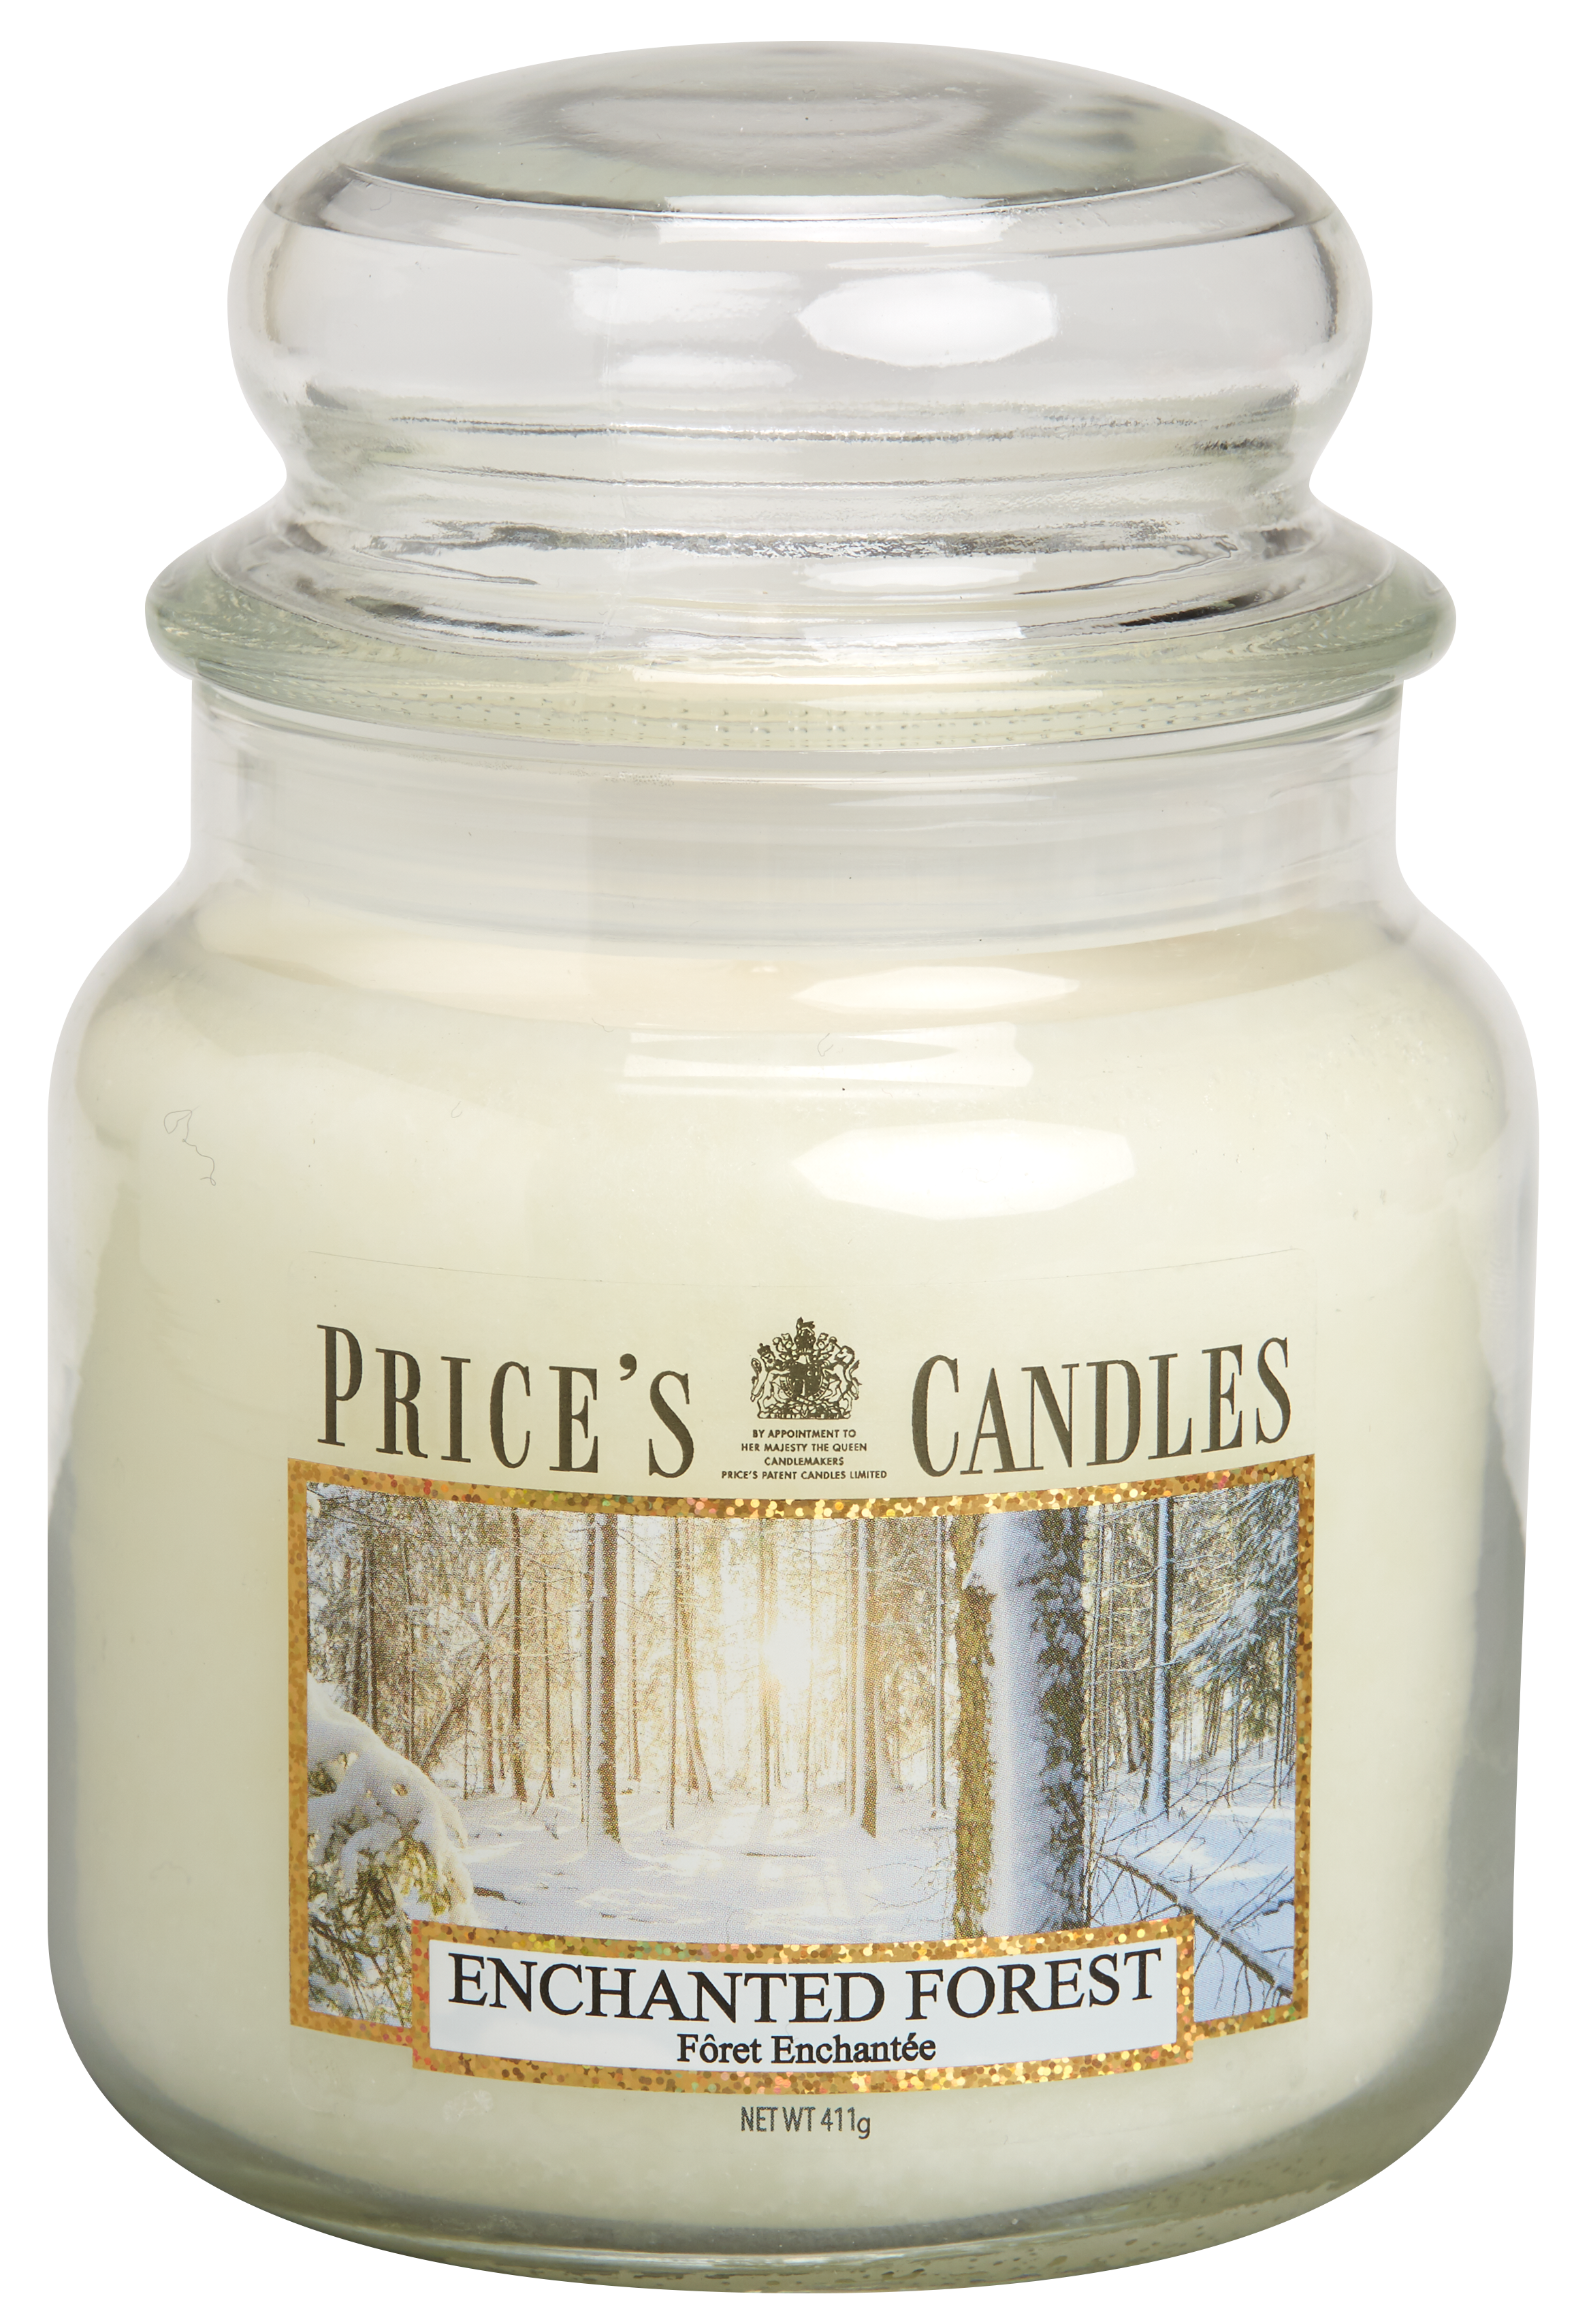 Prices Candle "Enchanted Forest" 411g   